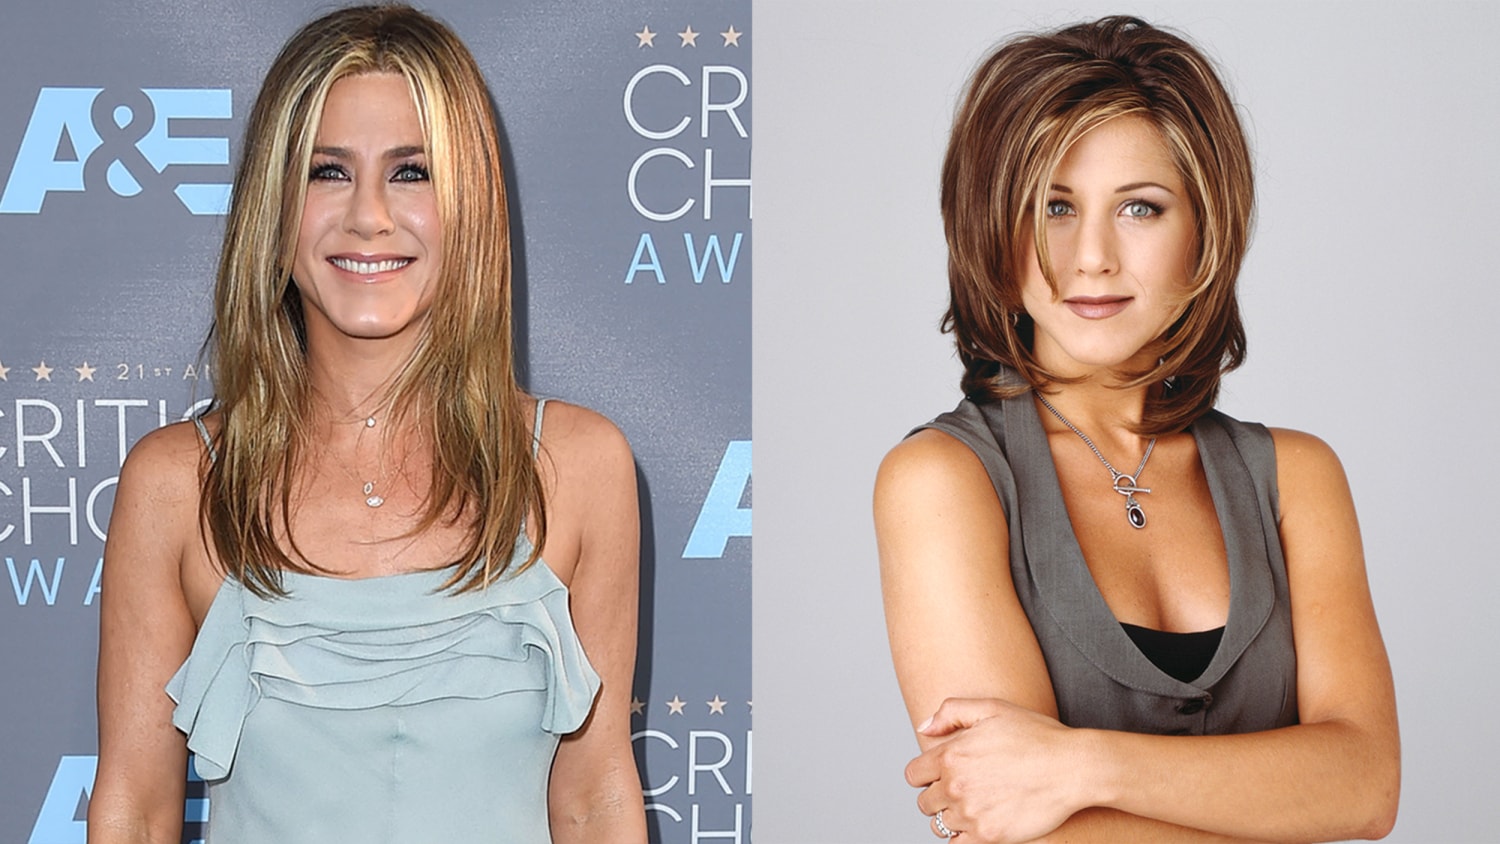 Jennifer Aniston and the charm bracelet she wears on the Elle cover